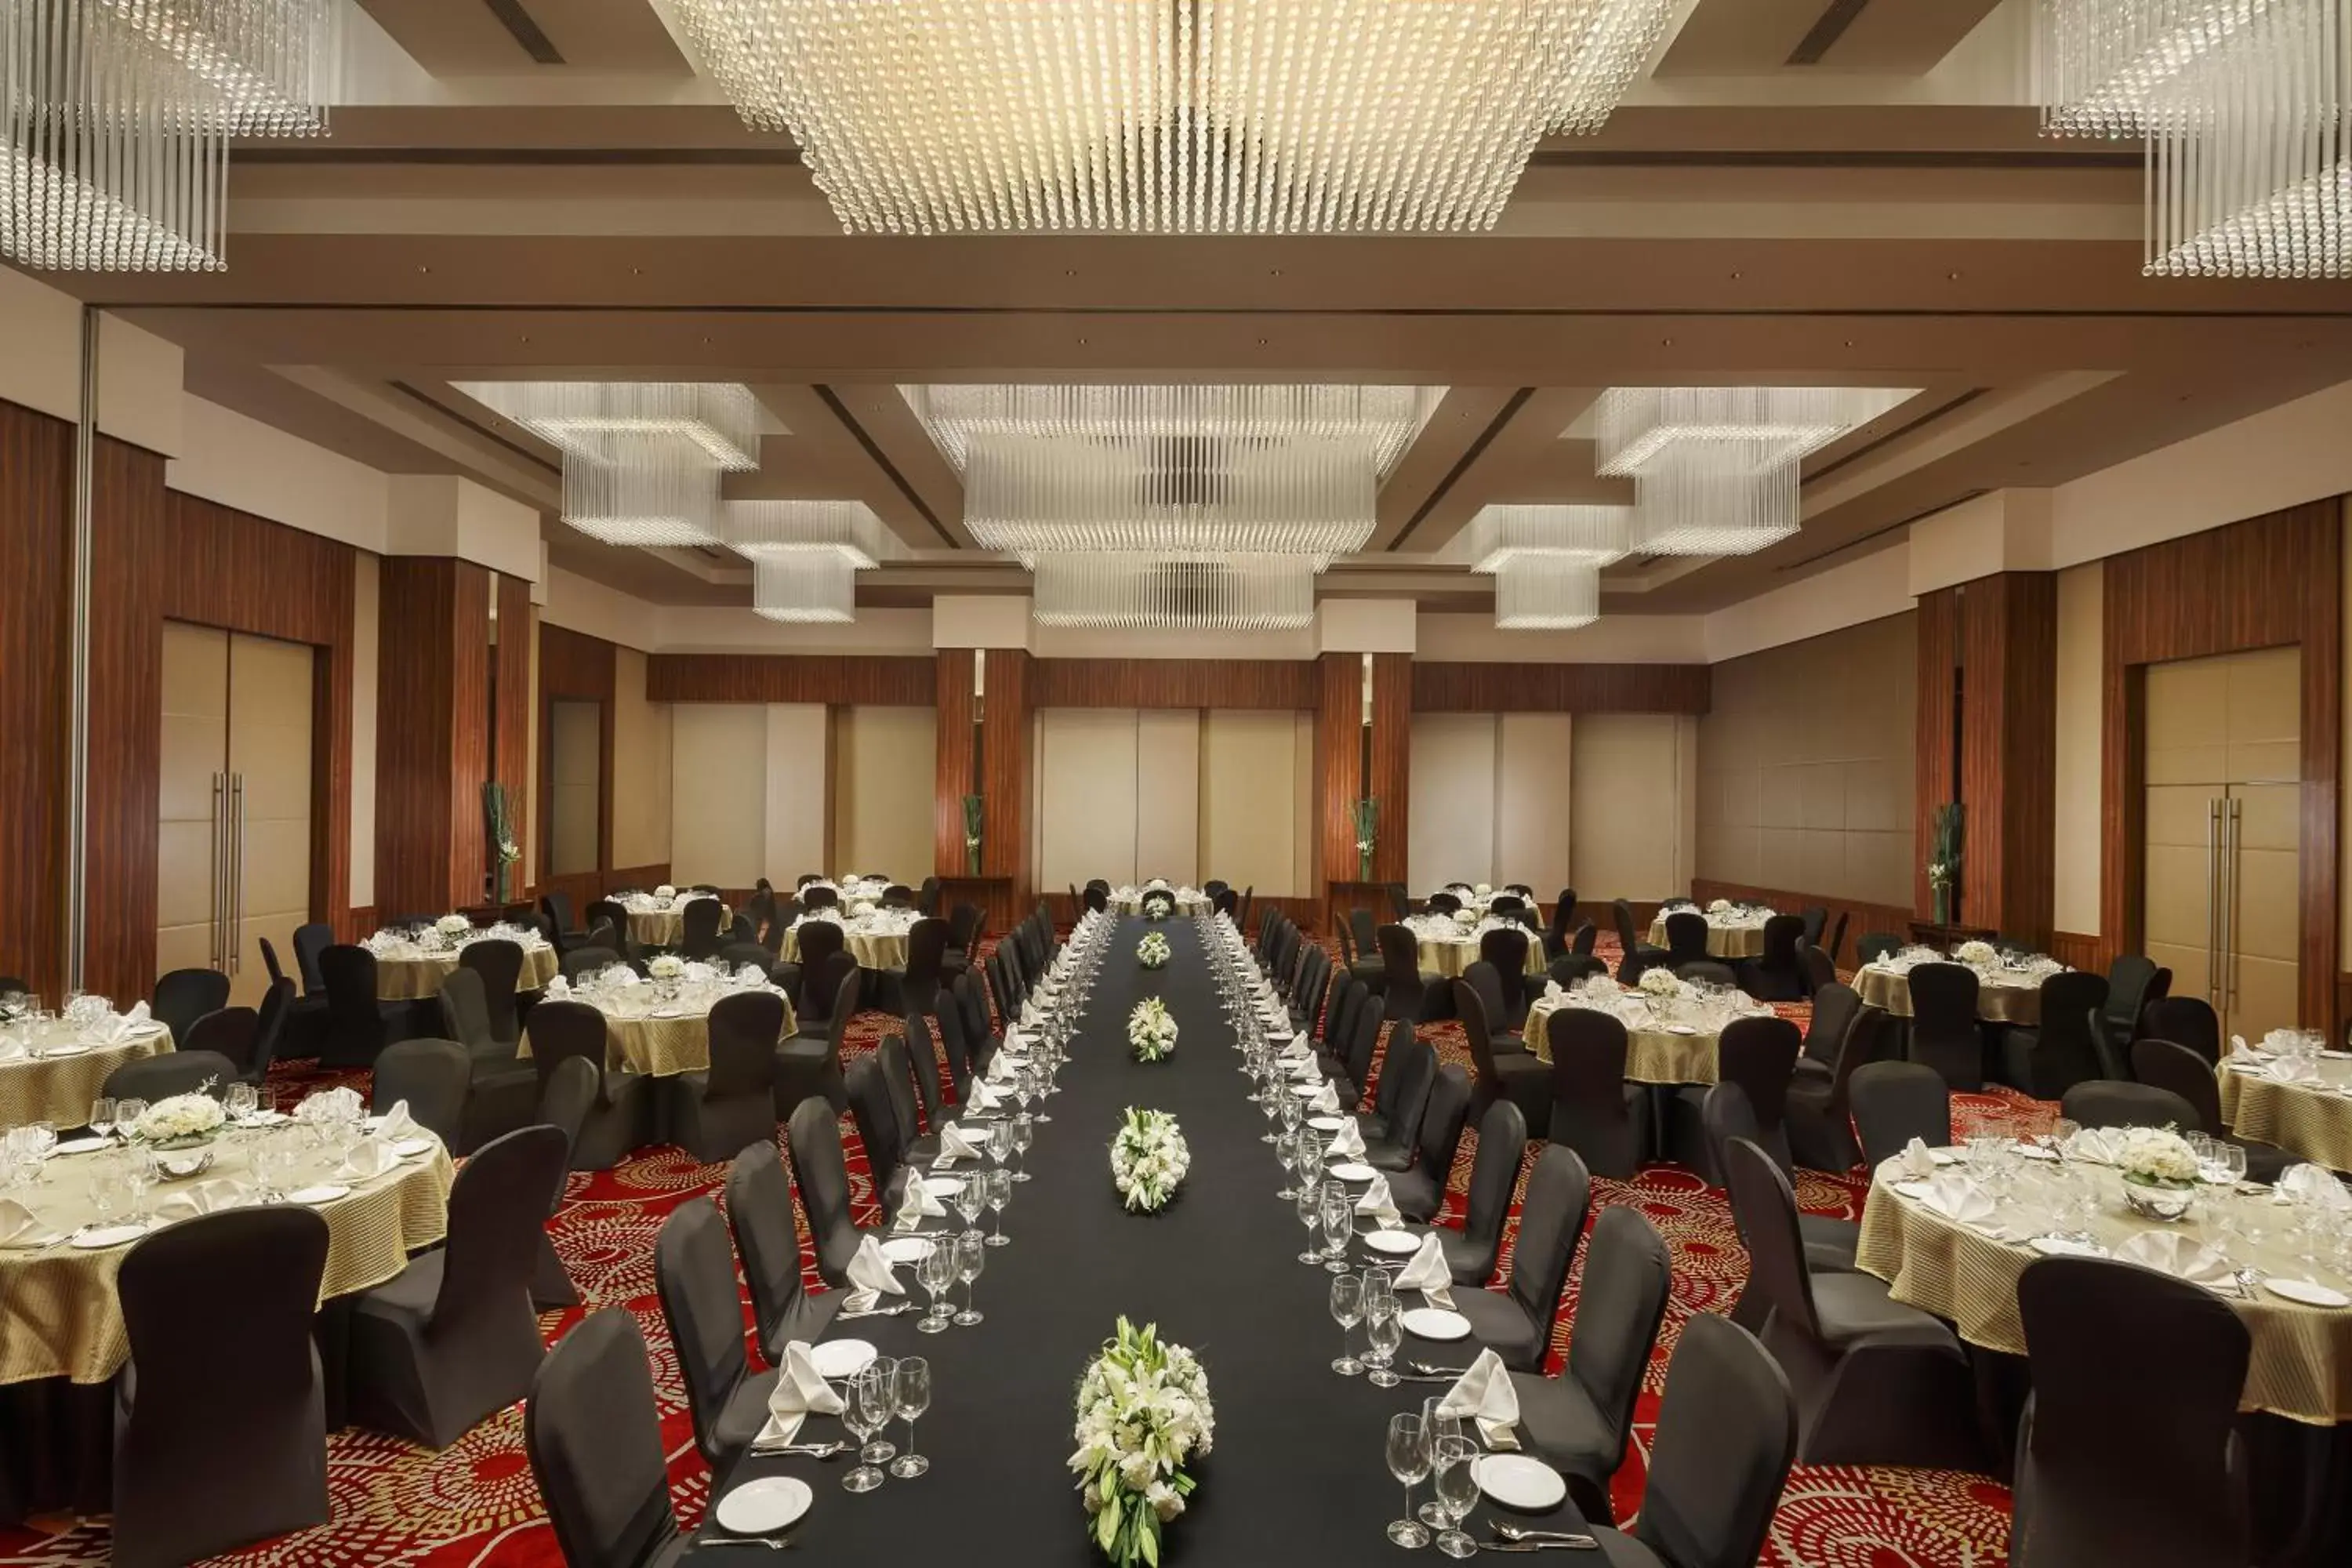 Banquet/Function facilities, Banquet Facilities in Sandal Suites by Lemon Tree Hotels